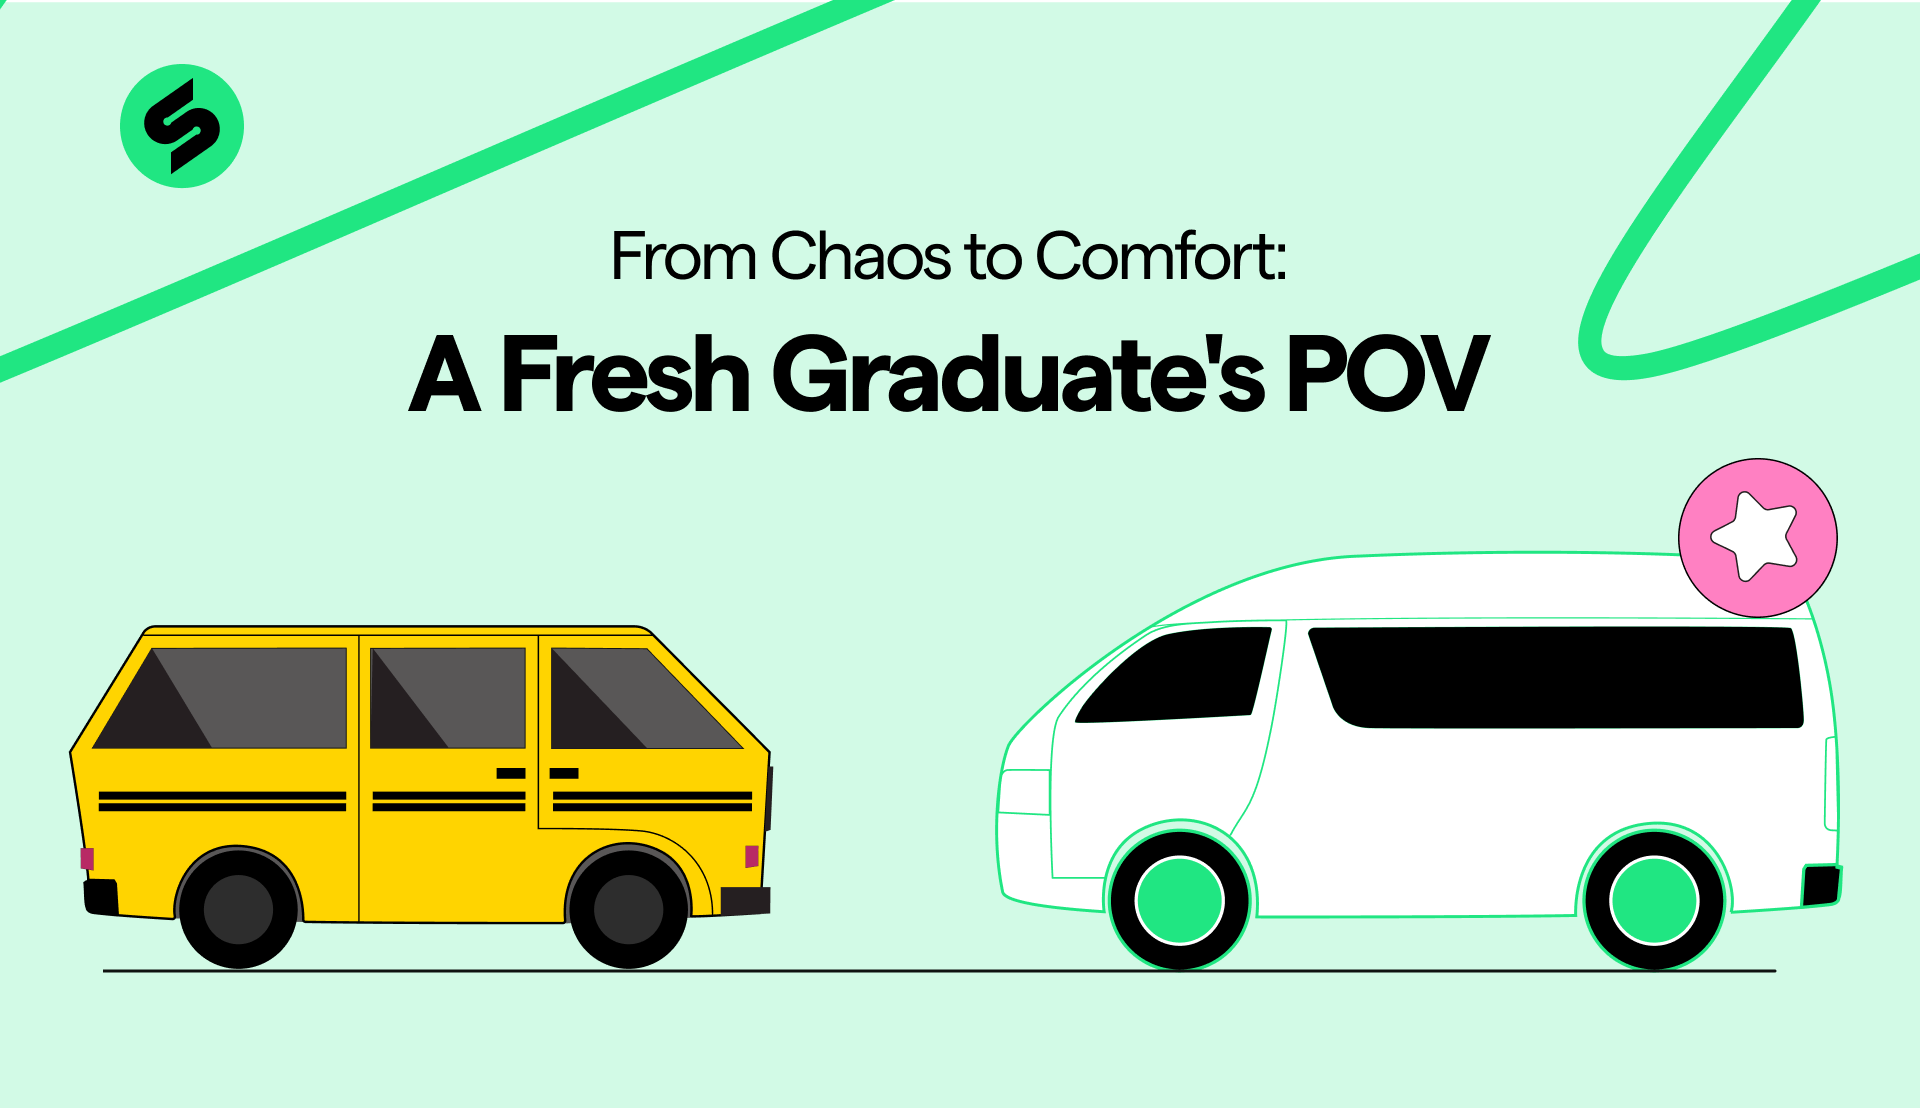 From Chaos to Comfort:  A Fresh Graduate's POV